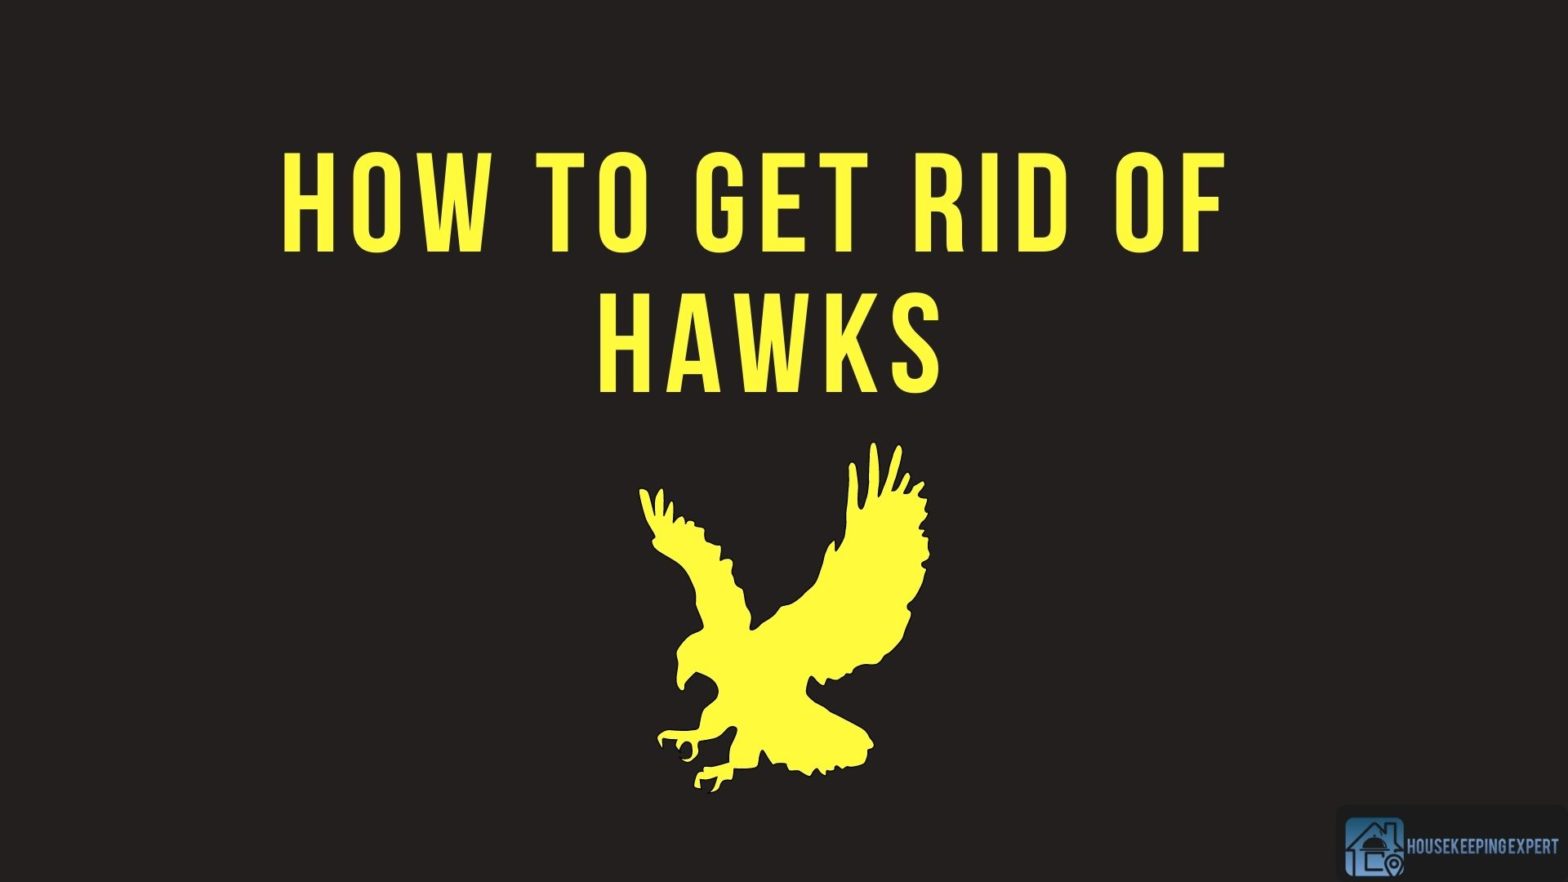 How To Get Rid Of Hawks